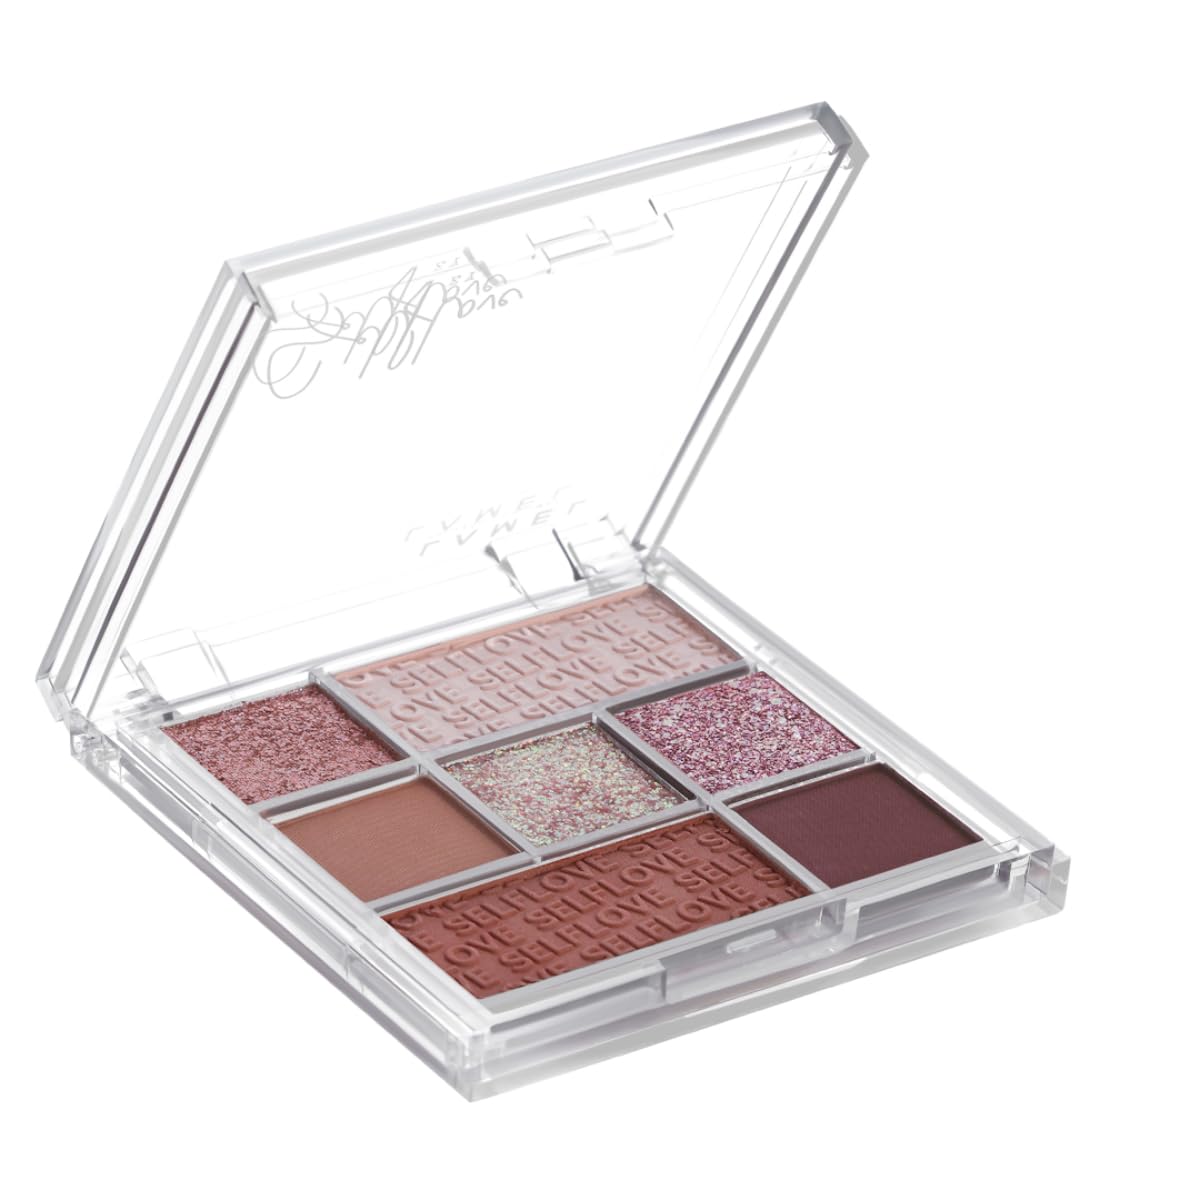 Lamel- SELFLOVE Eyeshadow Palette 401-Multi |Easily create beautiful looks |Soft, blendable texture |Matte, shiny, and pearlescent shades |No creasing or crumbling |8.5gm